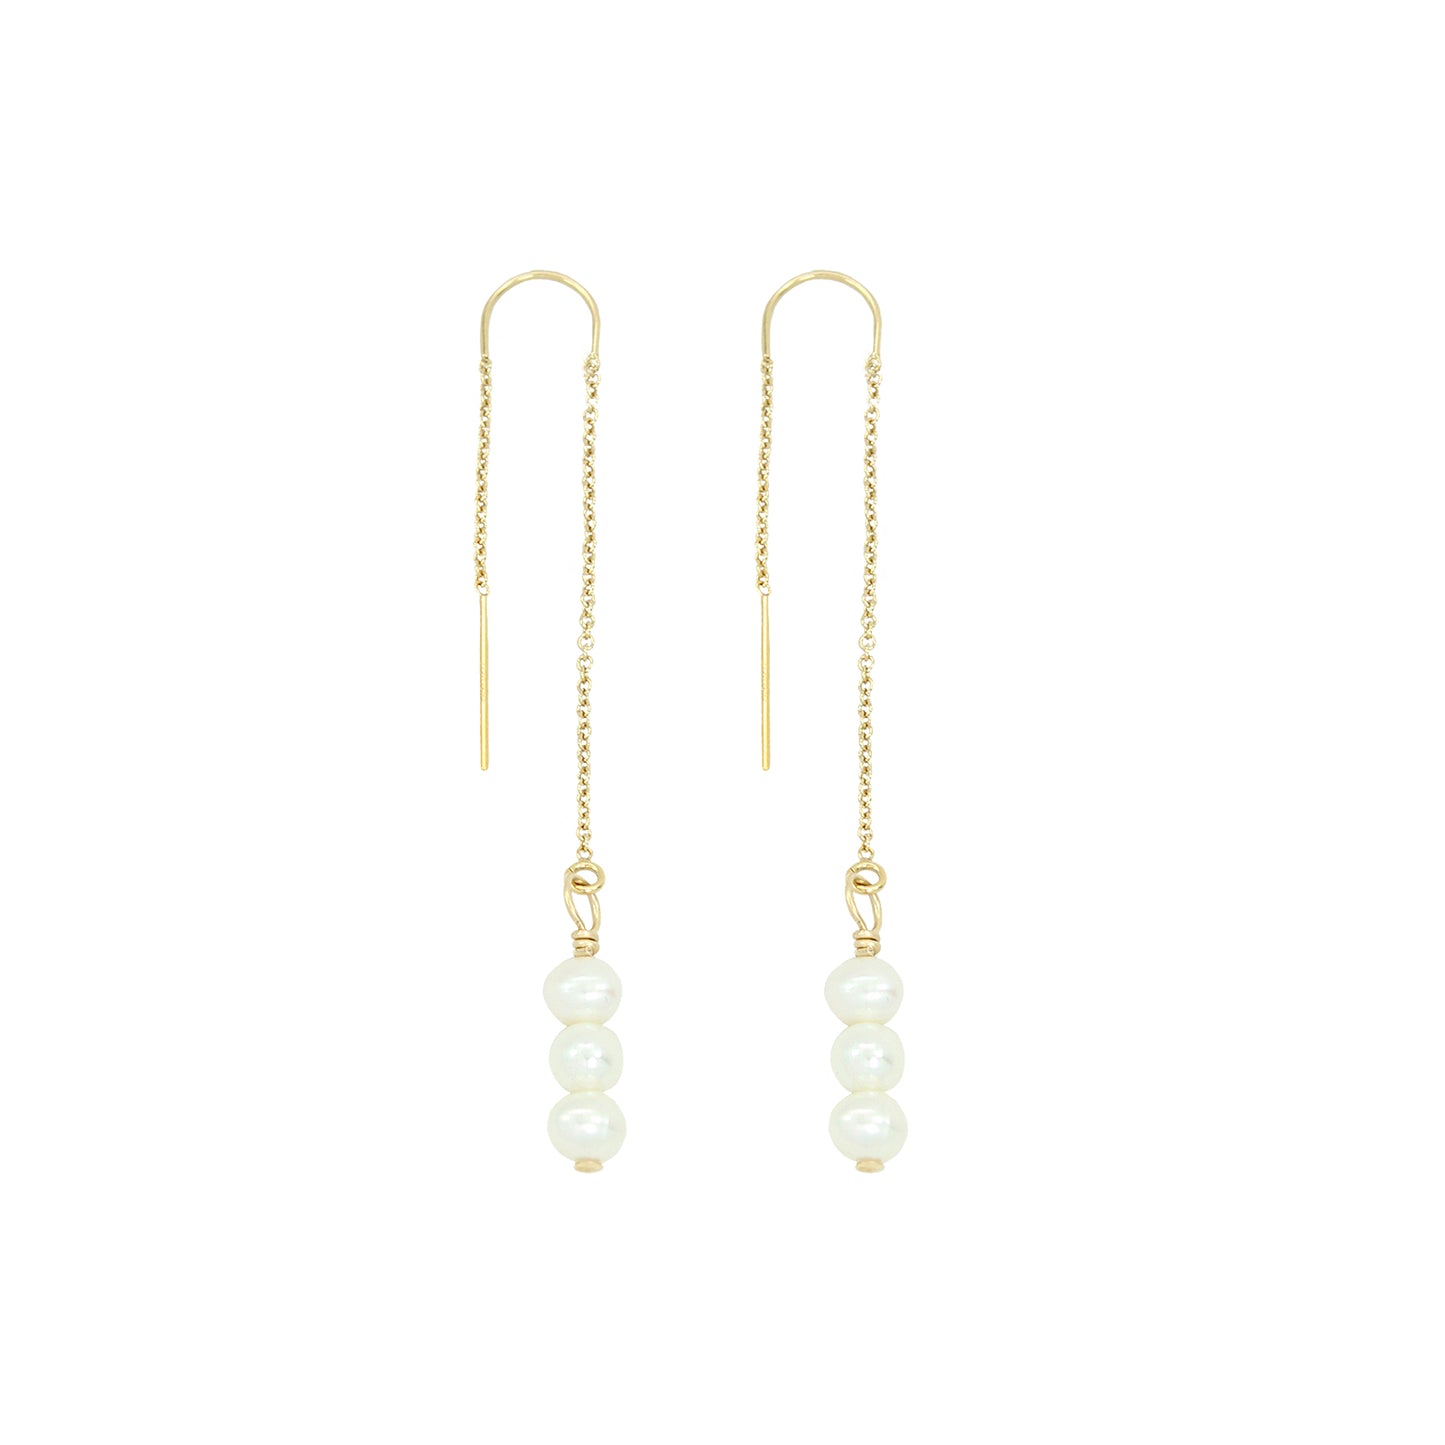 pearl droplet threader earrings. freshwater pearl droplet threaders. pearl threaders. pearl dangle earrings. dangly pearl earrings. threader earrings. gold filled threaders. Gems by Laura. 